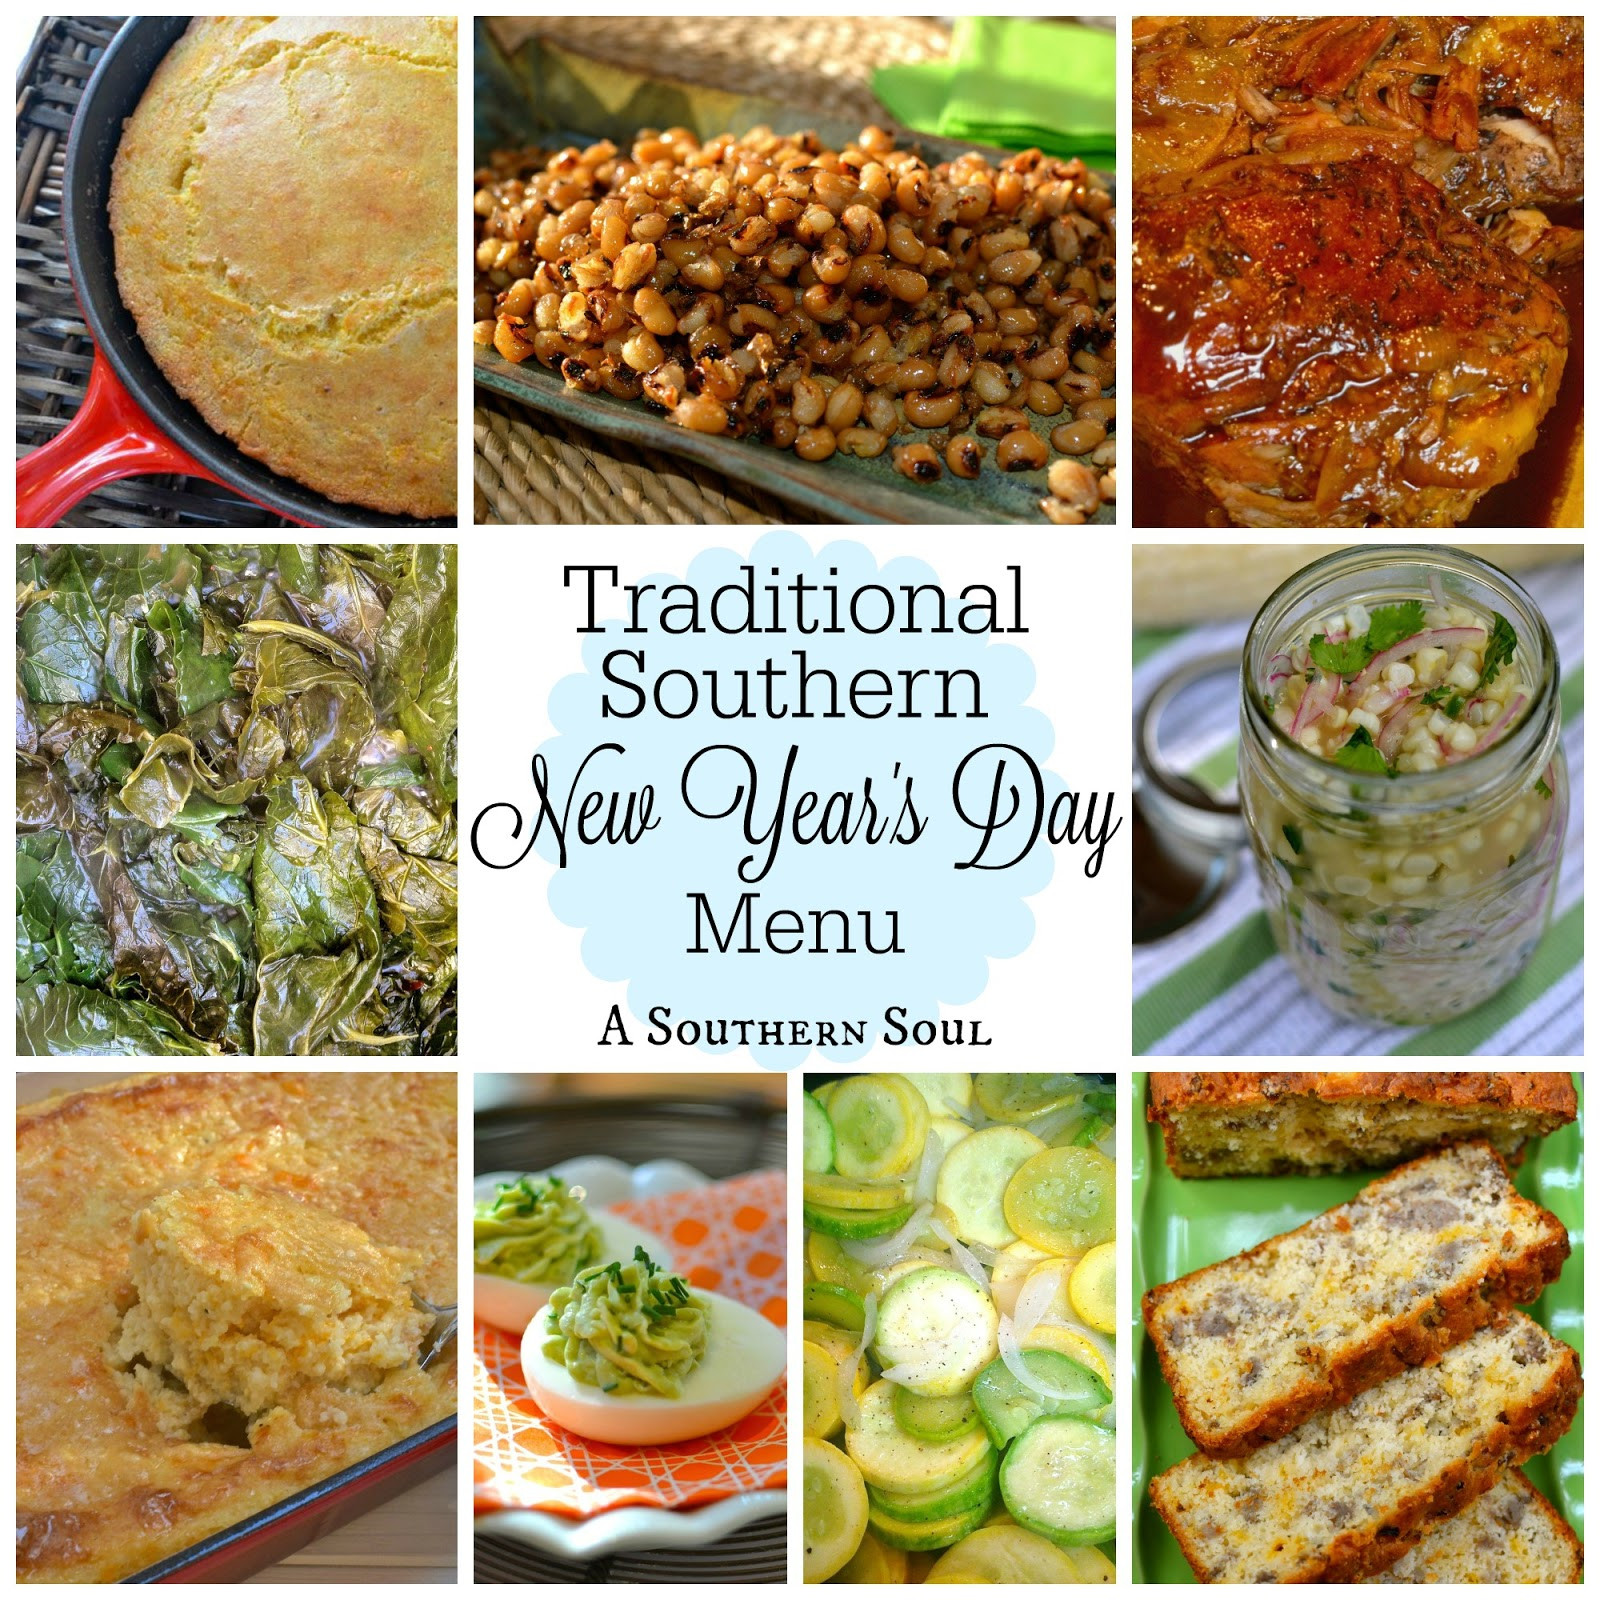 New Year Day Dinner Menu
 Traditional Southern New Year’s Day Menu